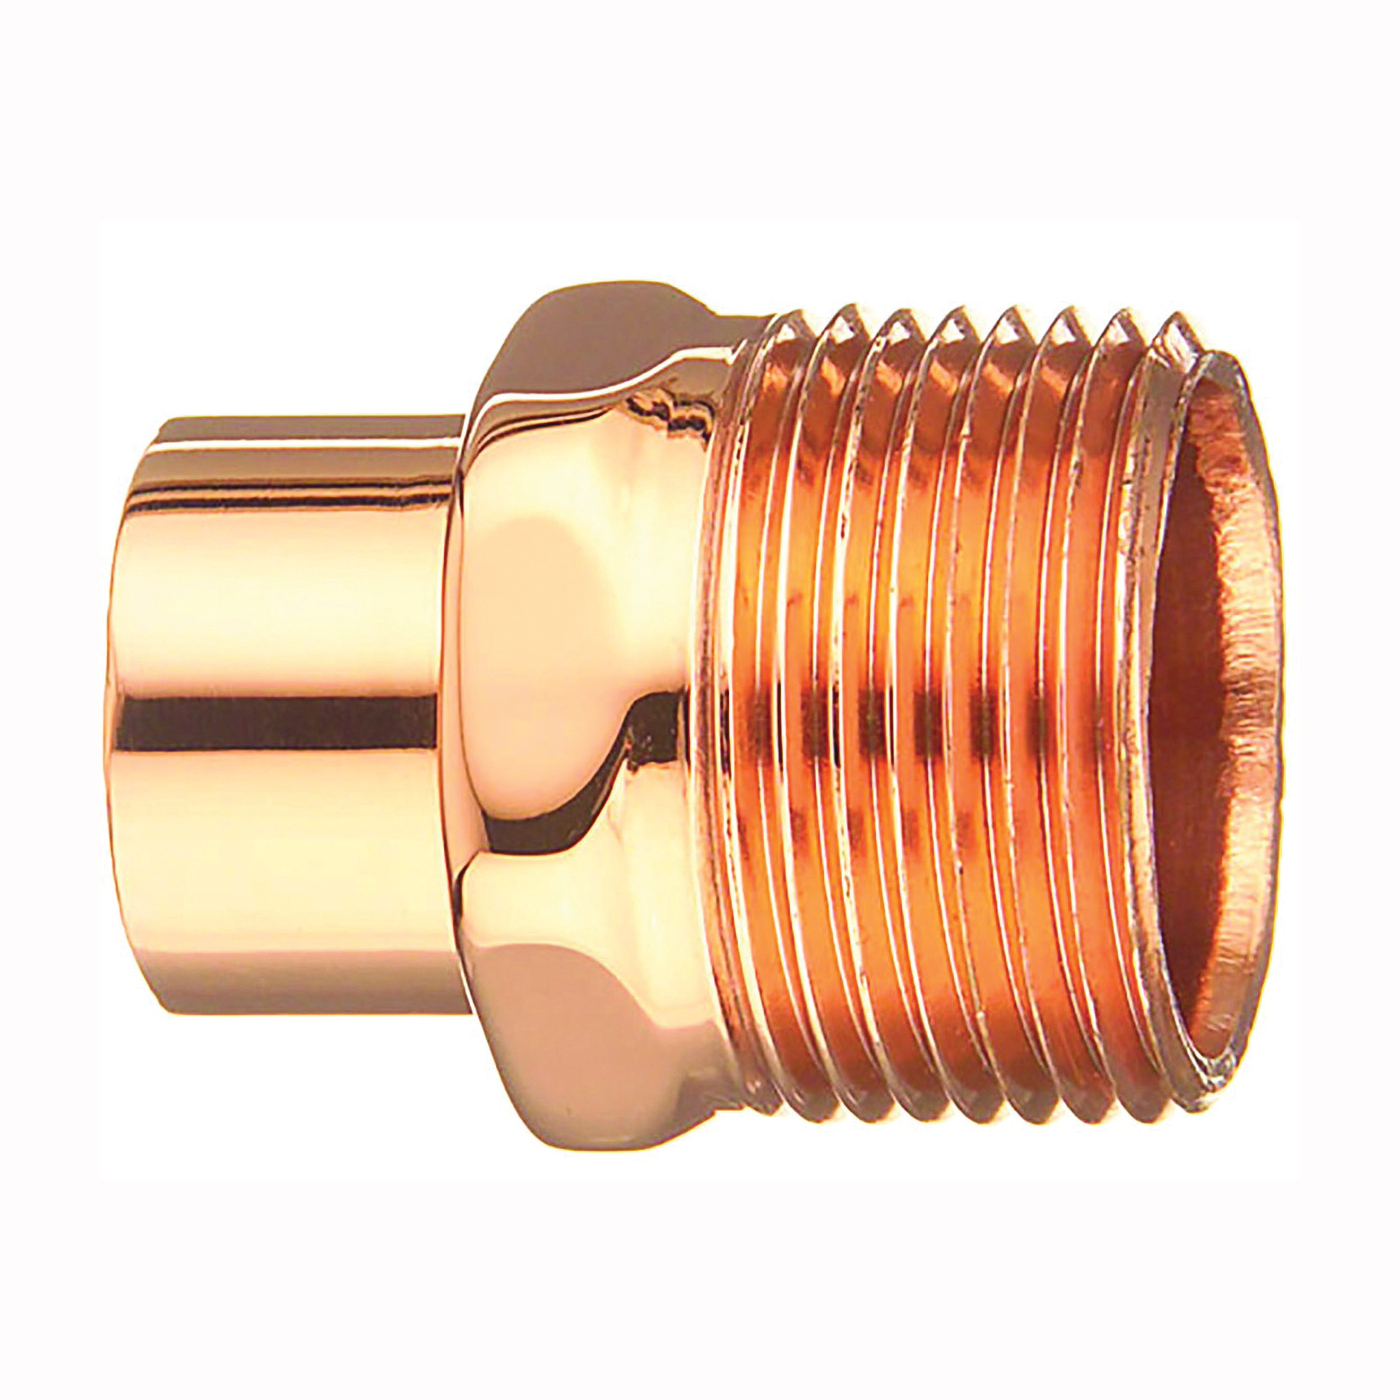 104-2 Series 30444 Street Pipe Adapter, 3/4 in, FTG x MIP, Copper